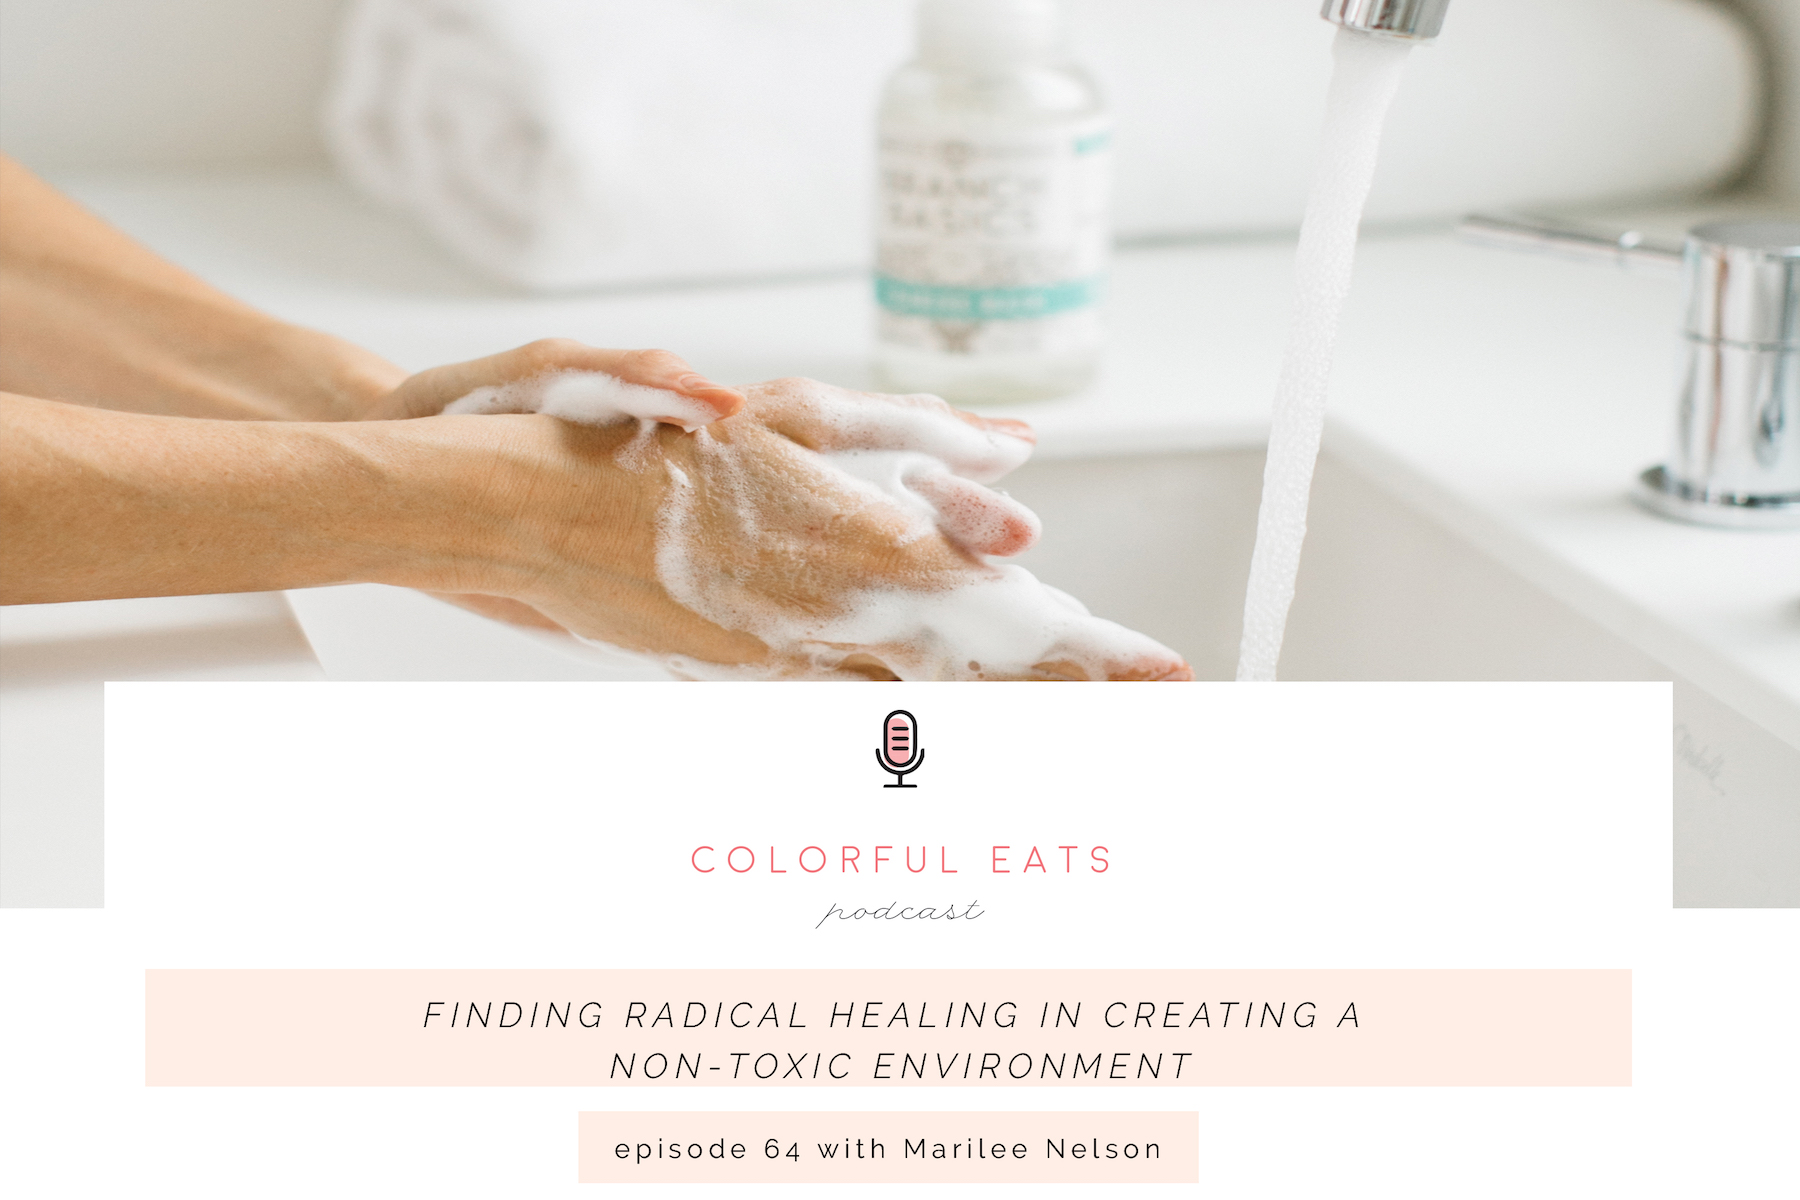 Episode 64: Finding Radical Healing in Creating a Non-toxic Environment with Marilee Nelson of Branch Basics